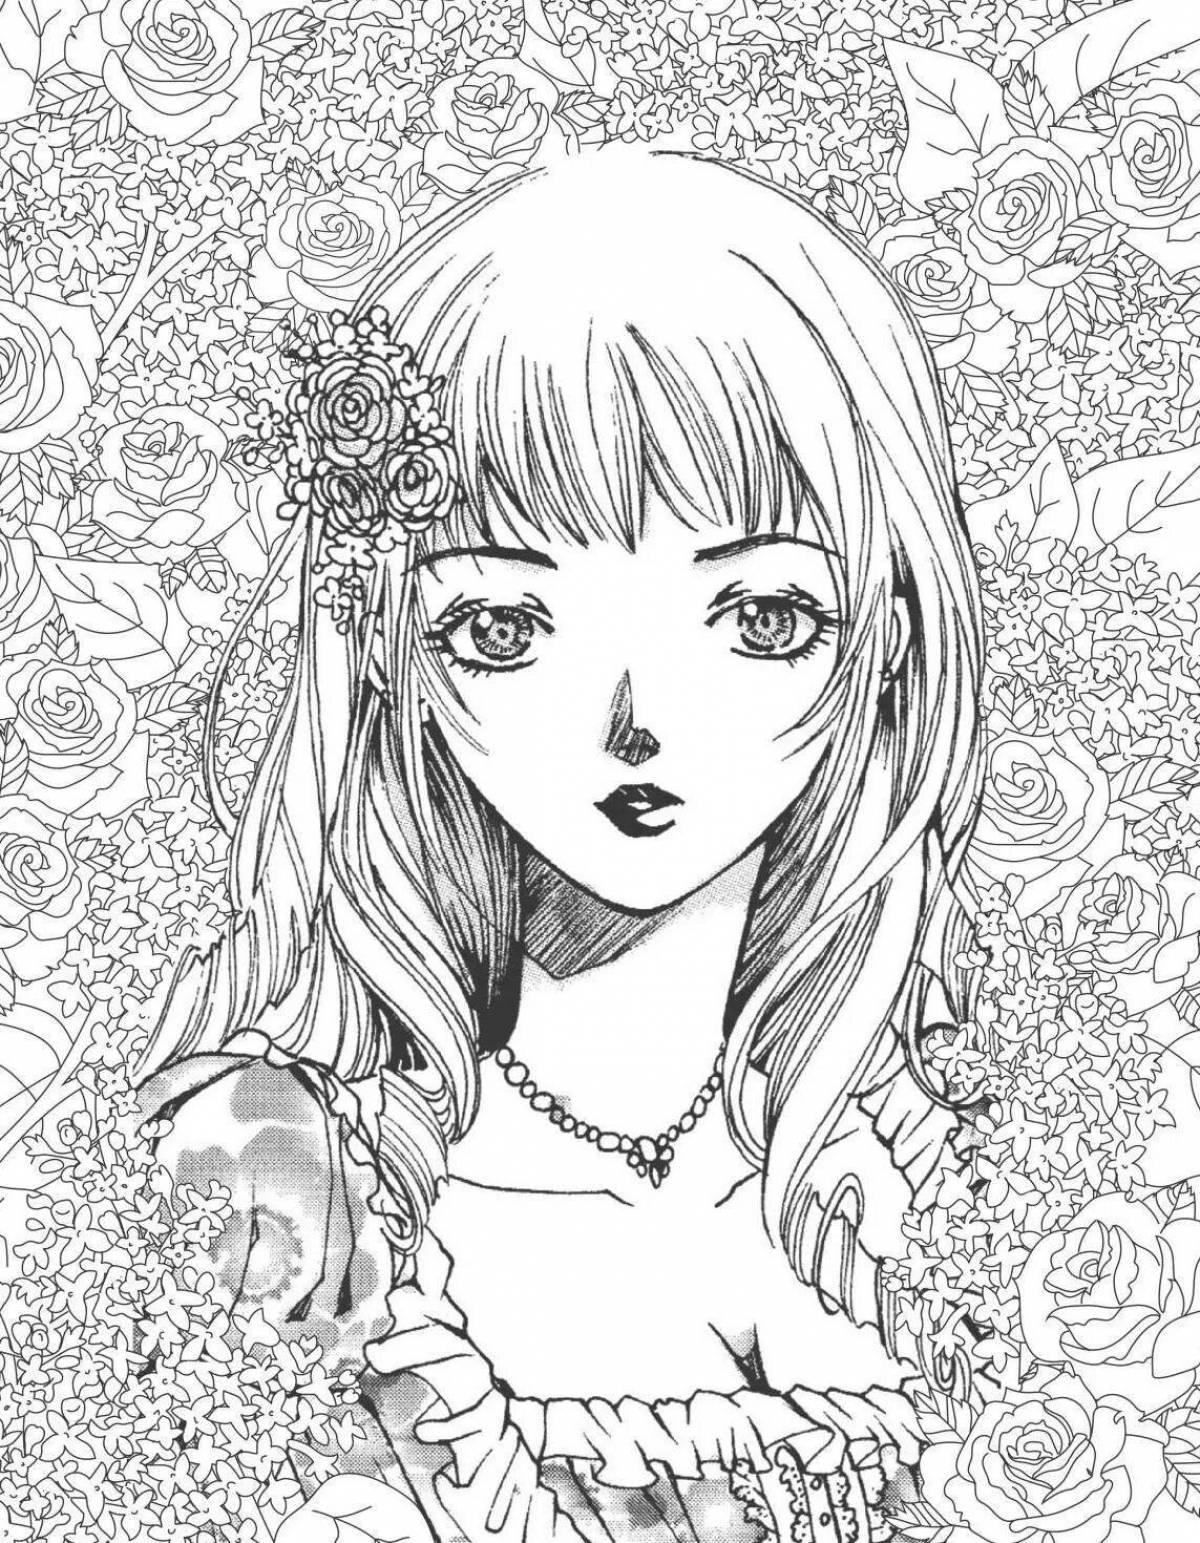 Touching anime style antistress coloring book